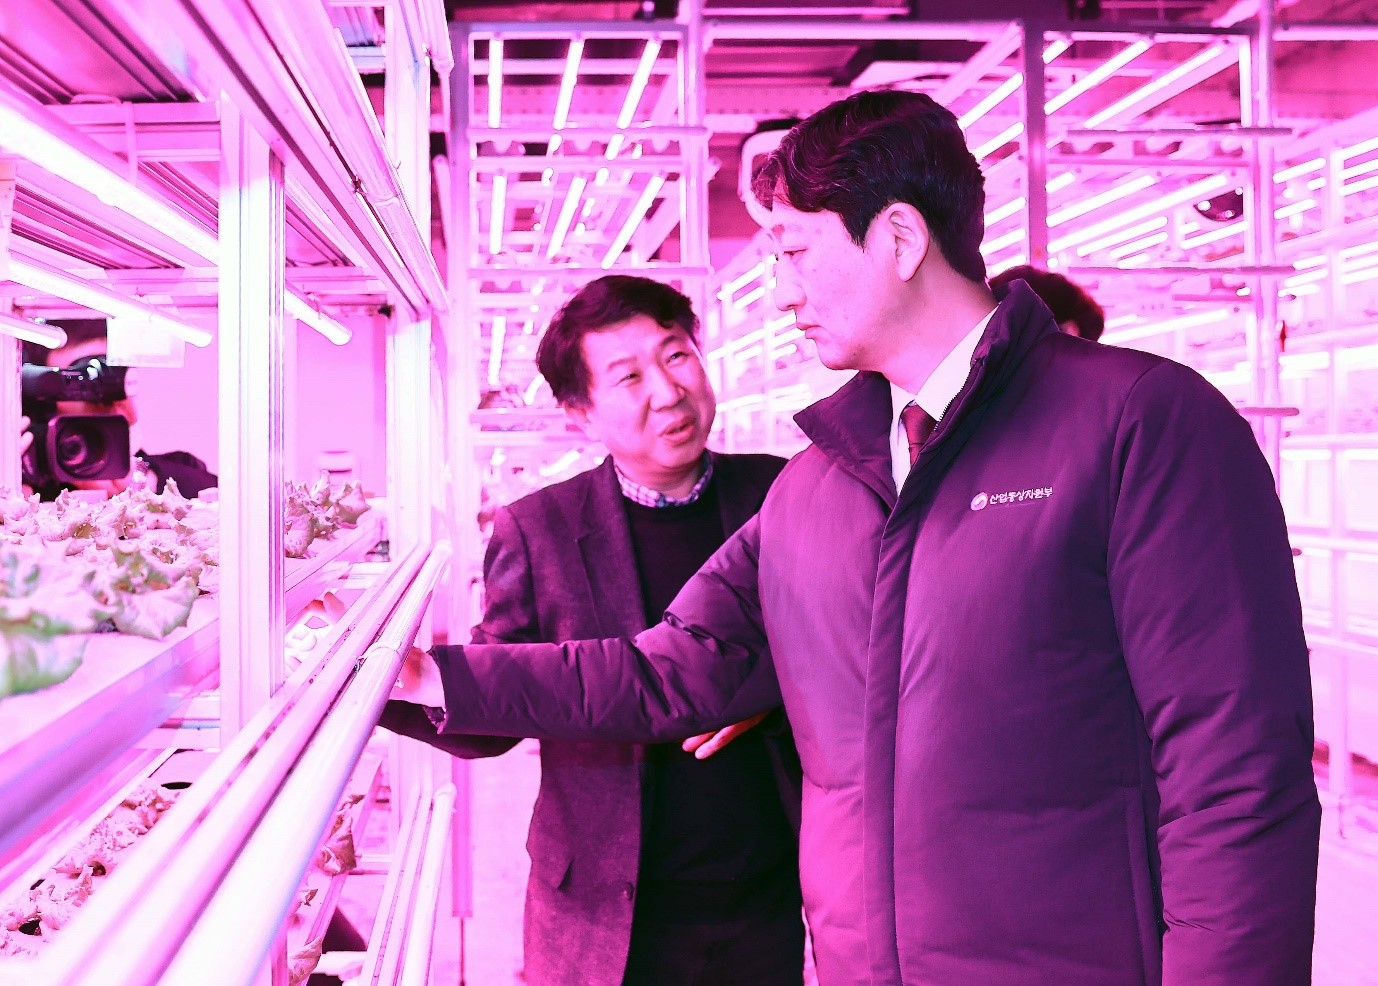 Trade Minister visits smart farming company to discuss exports Image 0